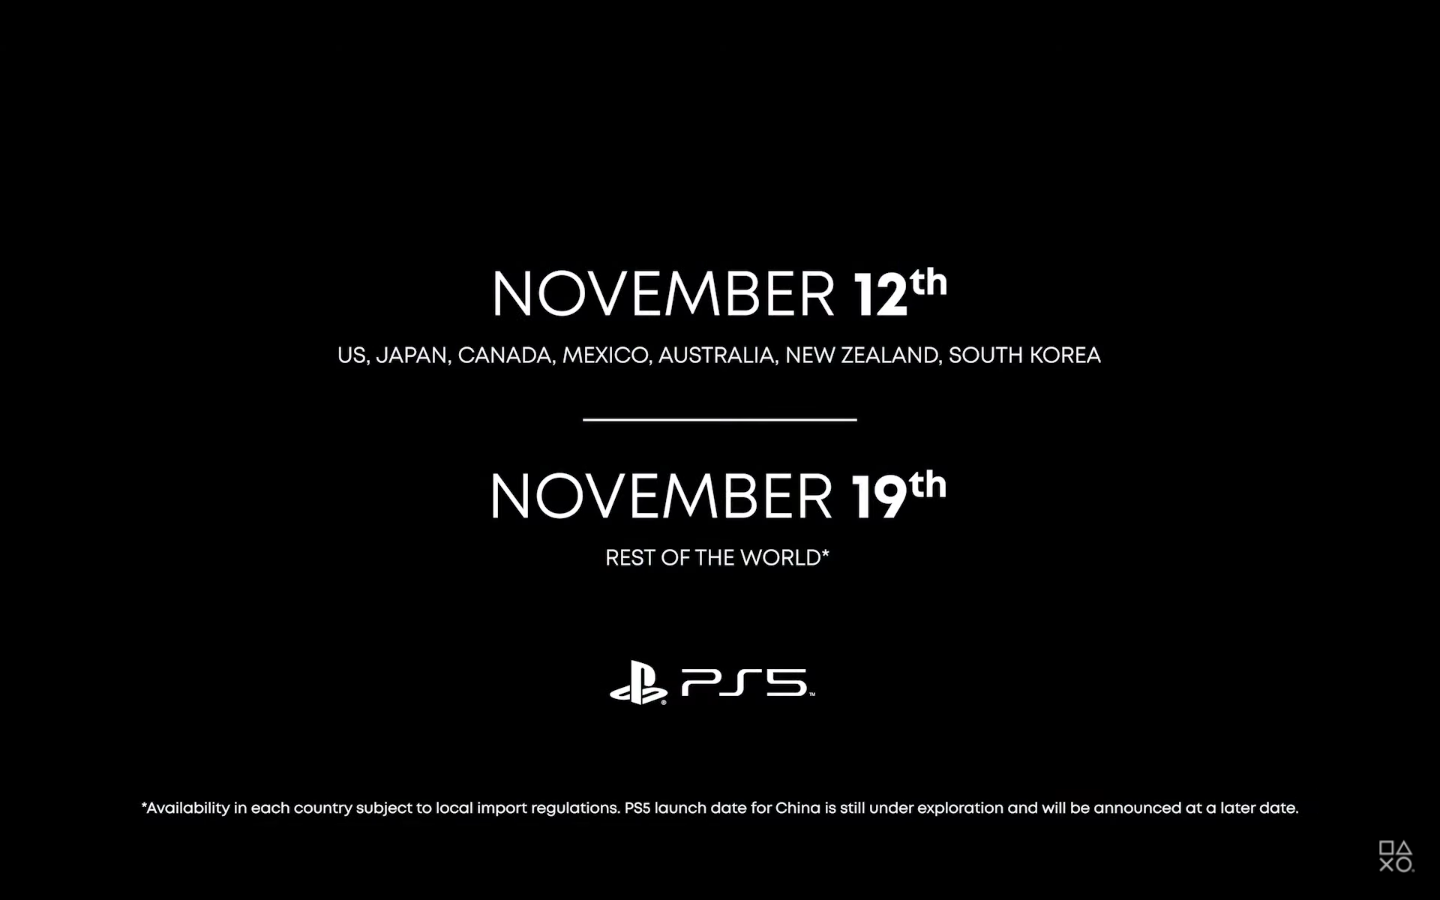 next playstation release date